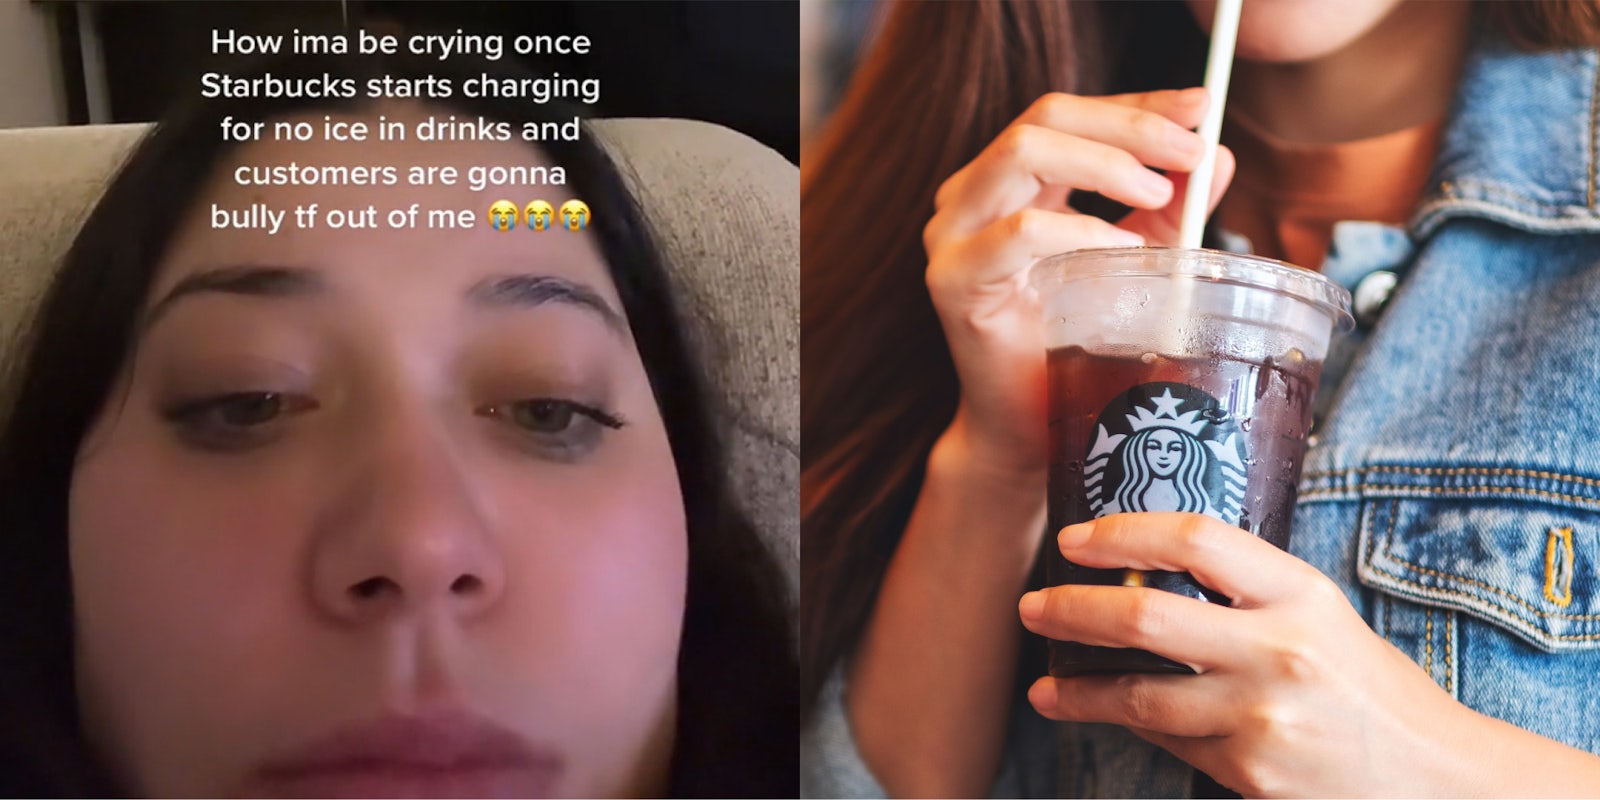 person on couch with caption 'How ima be crying once Starbucks starts charging for no ice in drinks and customers are gonna bully tf out of me' (l) person holding Starbucks drink with no ice in hands (r)